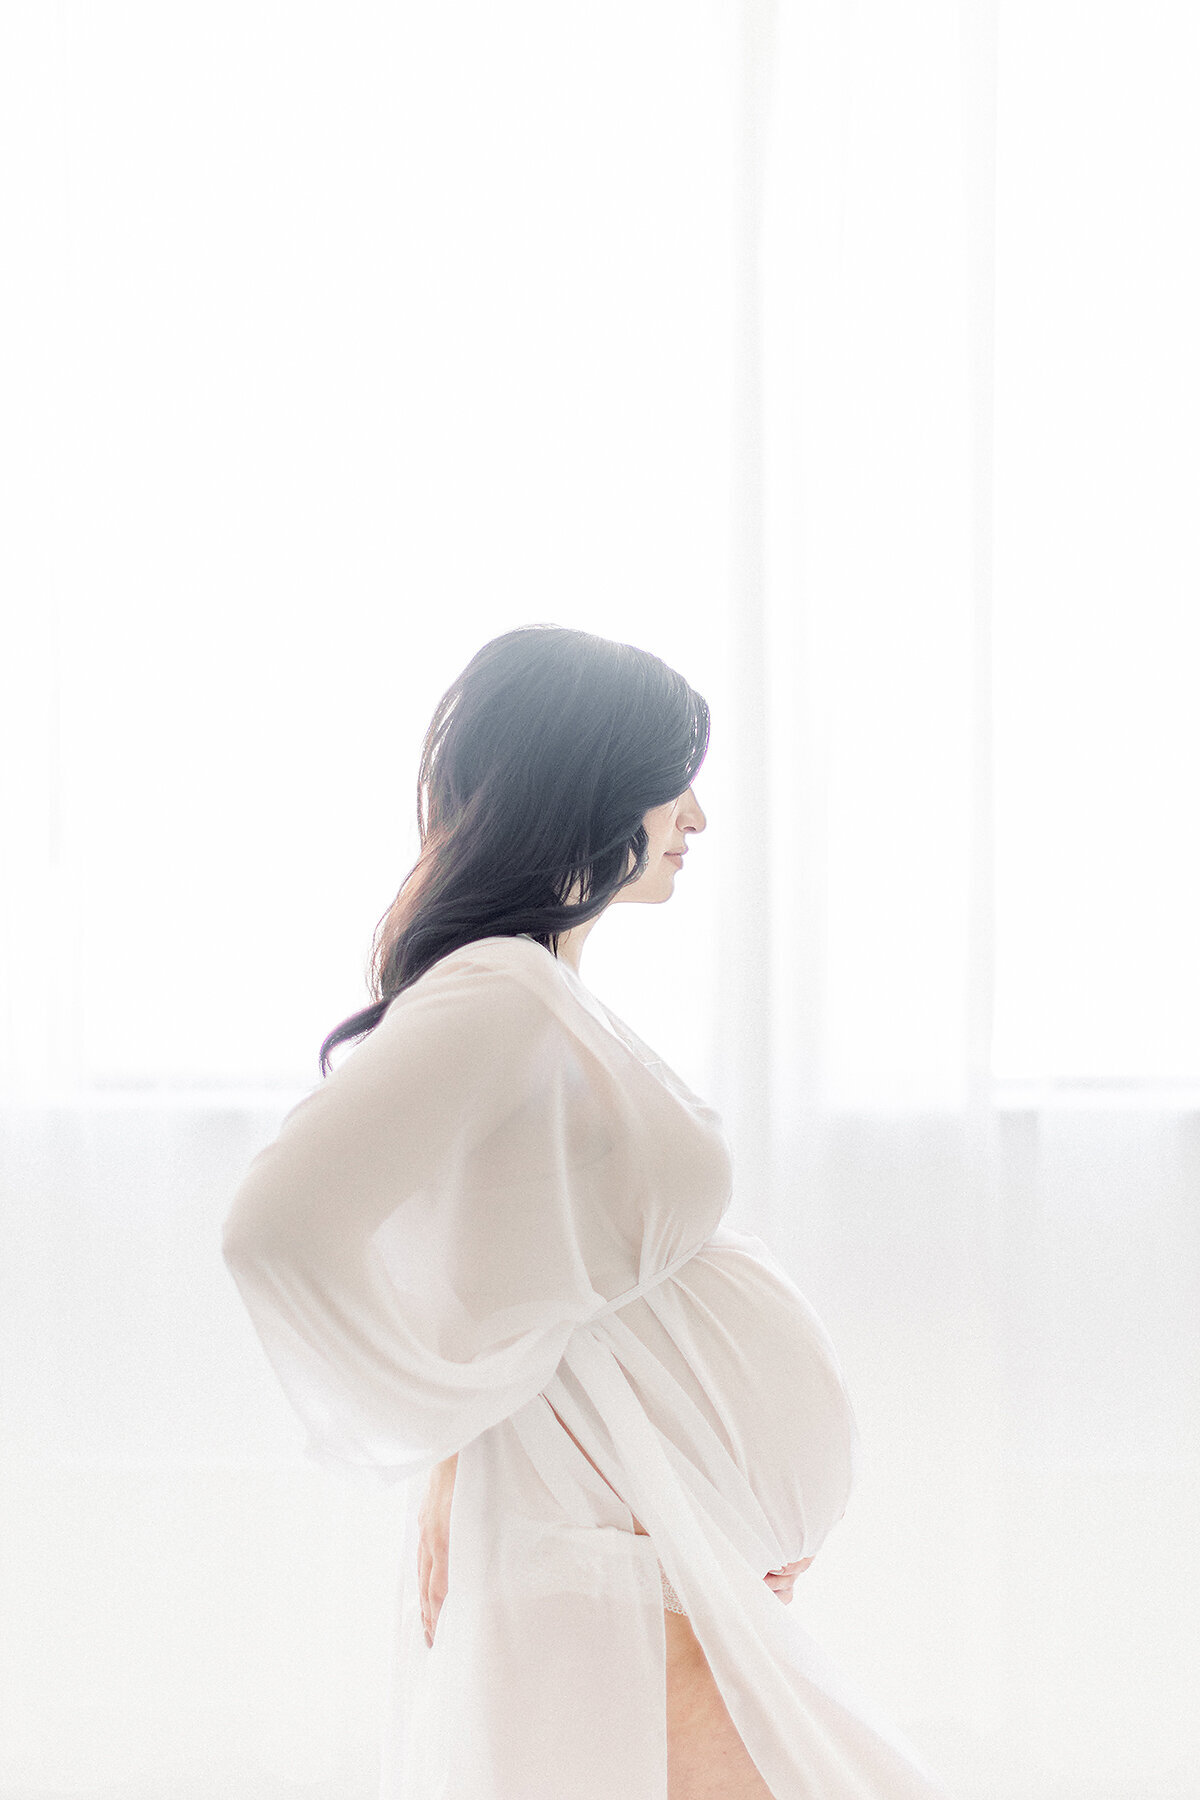 A light filled pregnant mother dressed in a chiffon maternity gown while she is standing in front of a window  at a Dallas/Fort Worth photography studio.